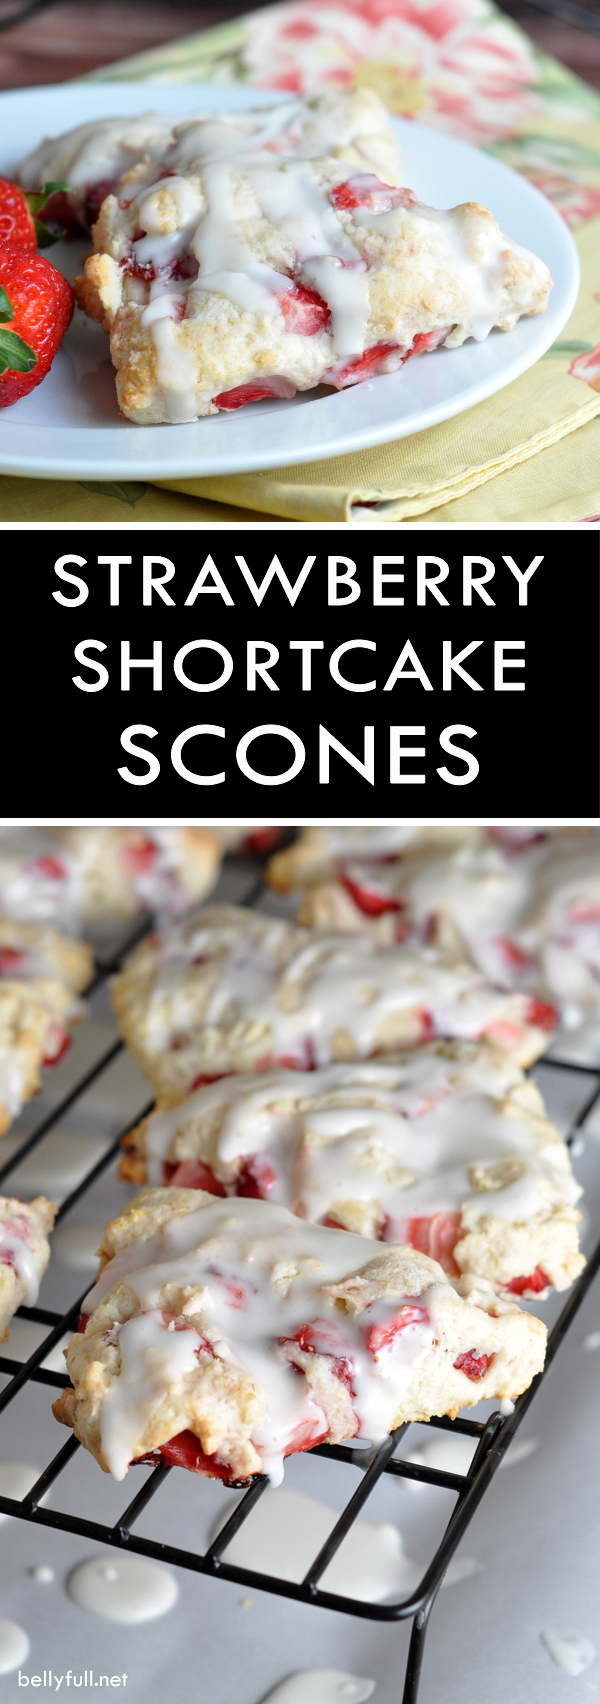 We've found 15 of the Best Unique Strawberry Shortcake Recipes that will help you take this classic dessert to the next level for your family and friends. These interesting versions of Strawberry Shortcake are such great Summer desserts ideas. Pin these yummy treats for later and follow us for more great food ideas.